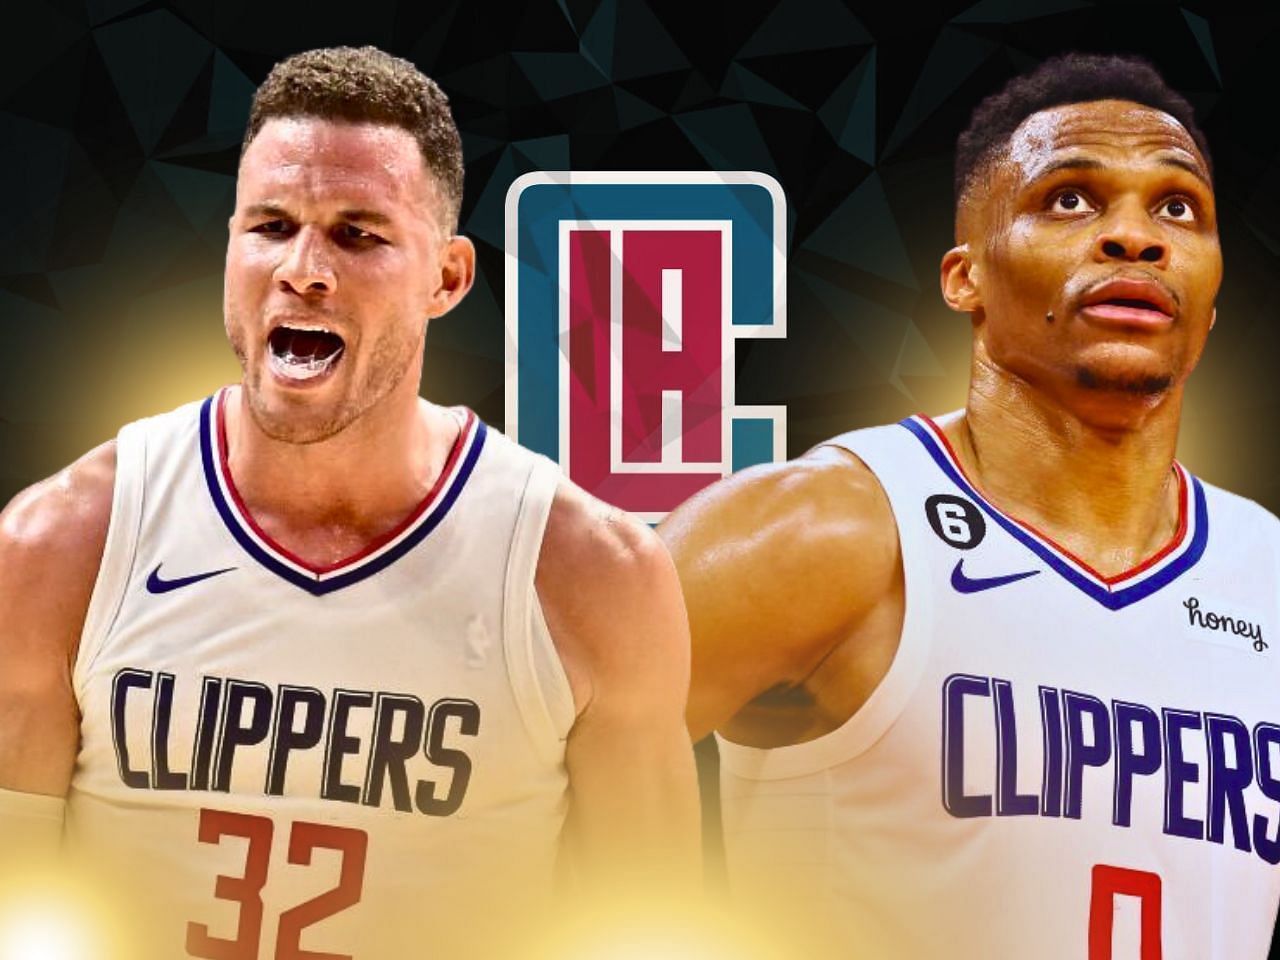 Reports: LA Clippers agree to trade Blake Griffin to Detroit